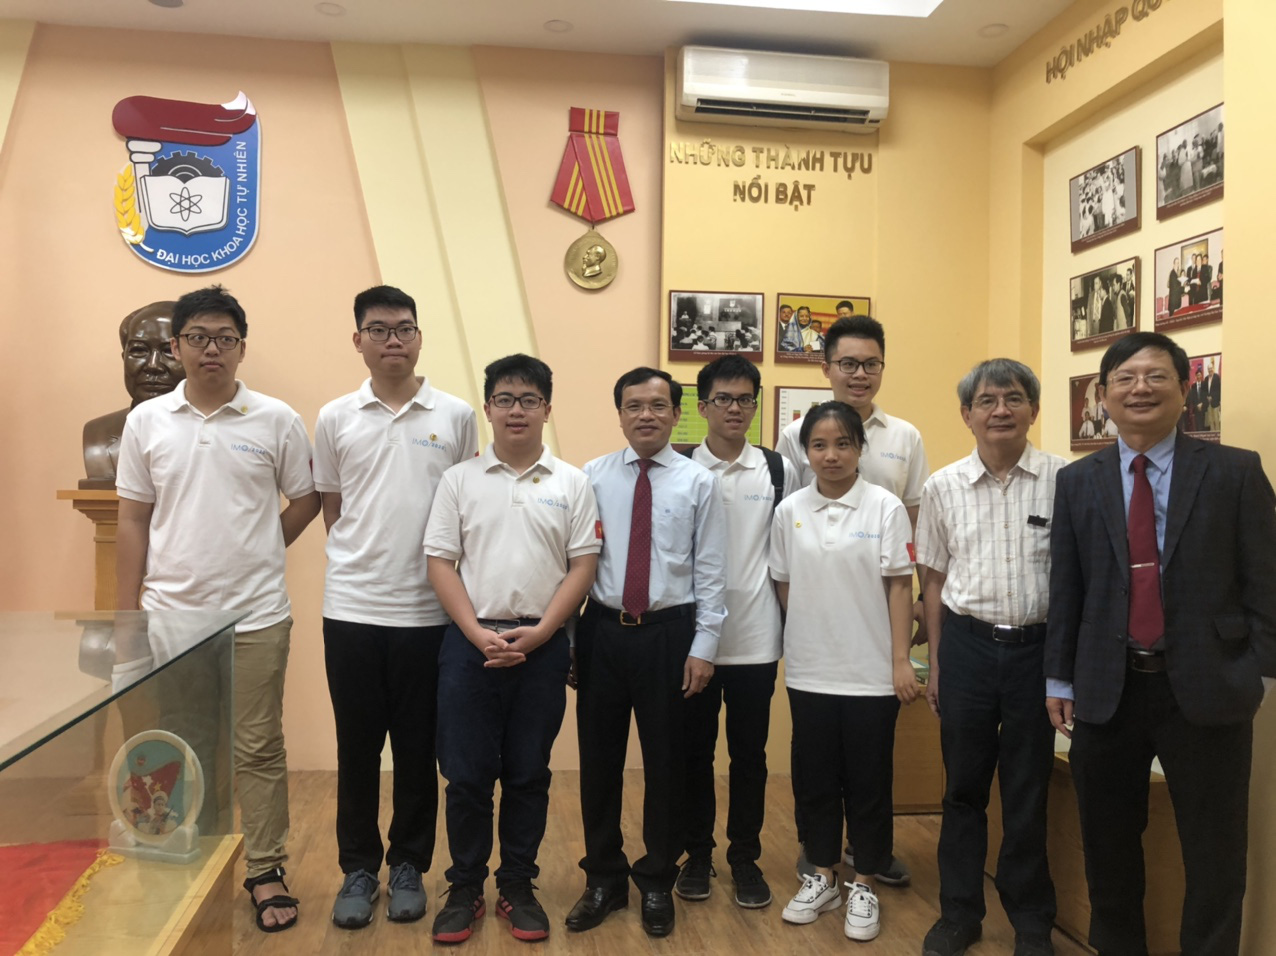 Vietnamese team wins 2 gold medals at Int'l Mathematical Olympiad 2020